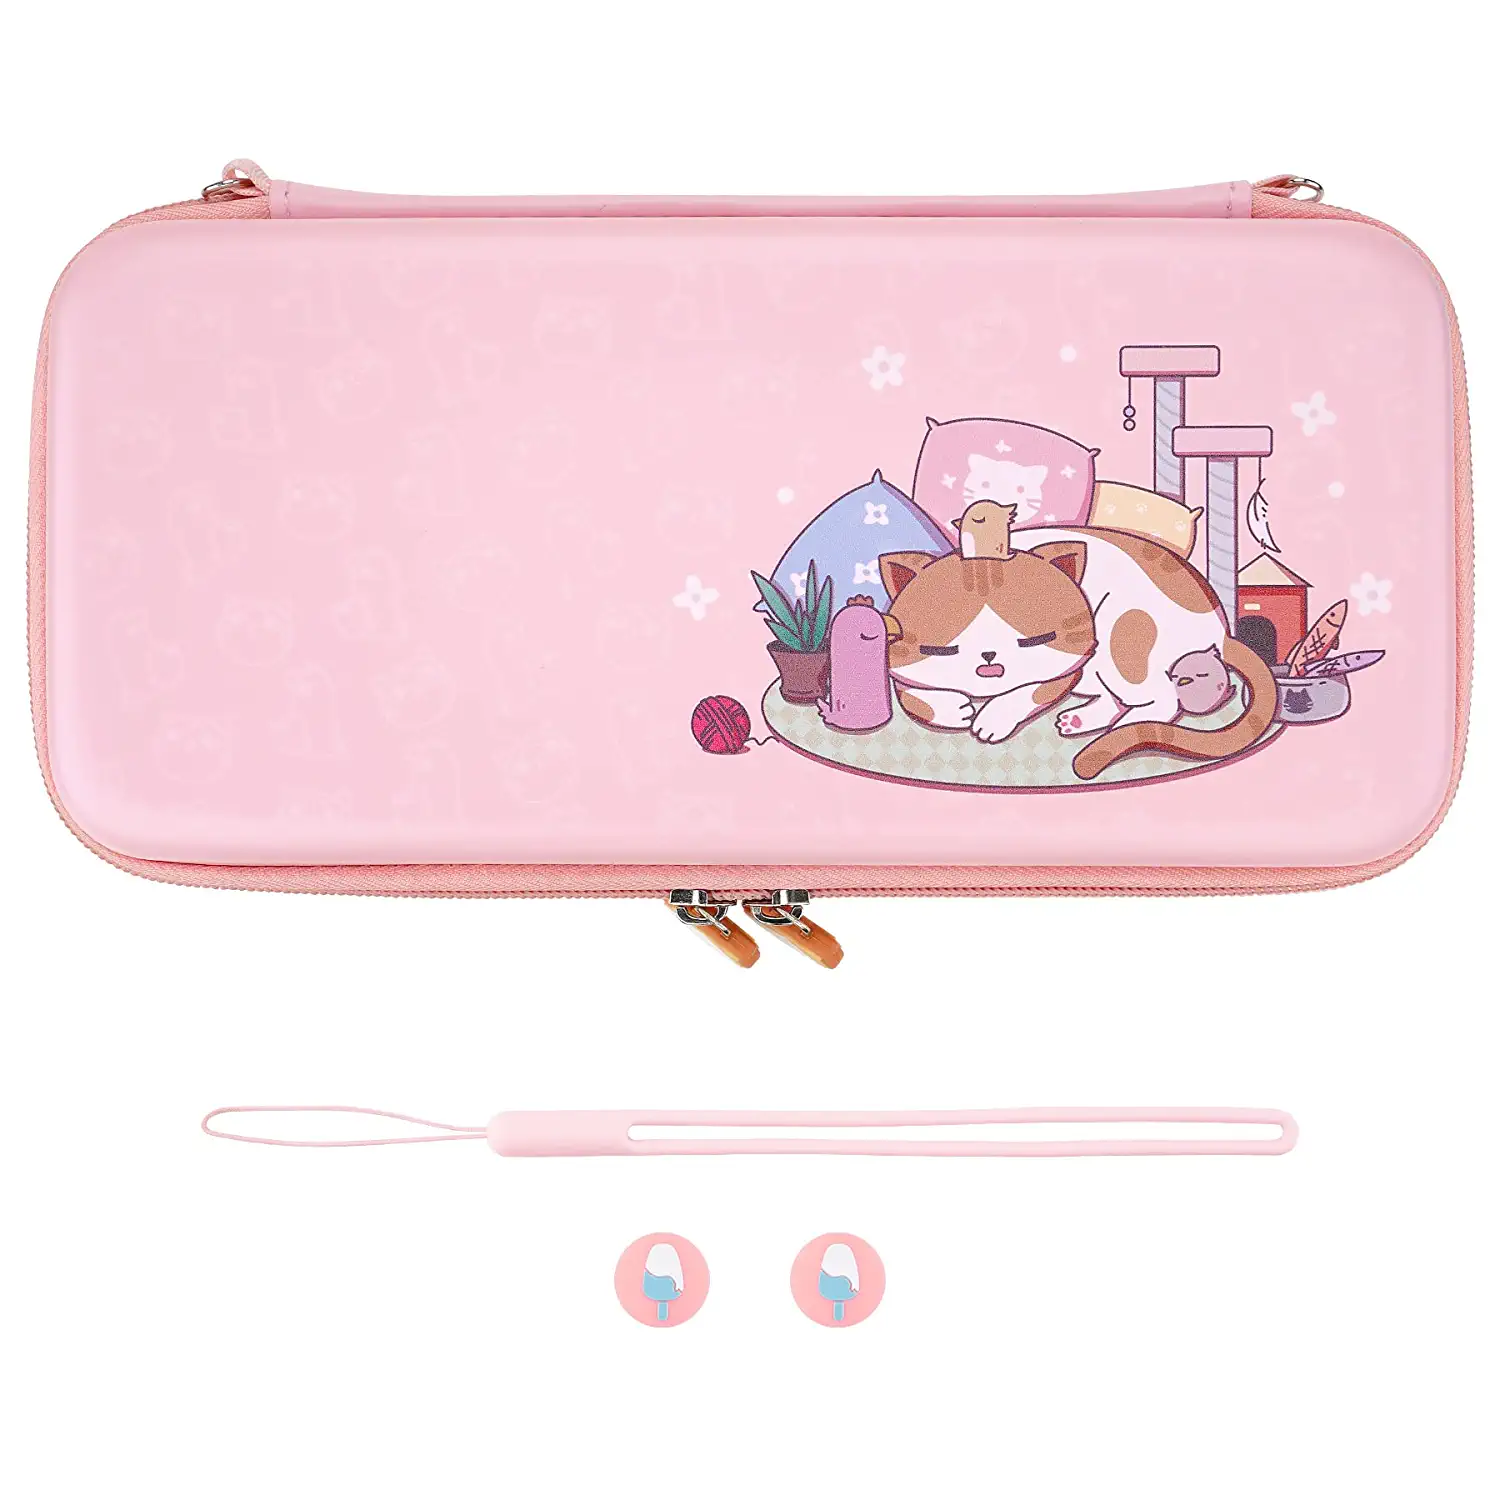 Pink Cute Carrying Case For Nintendo Switch & Switch Oled, Thumb Grip Caps + Kit - $40.99